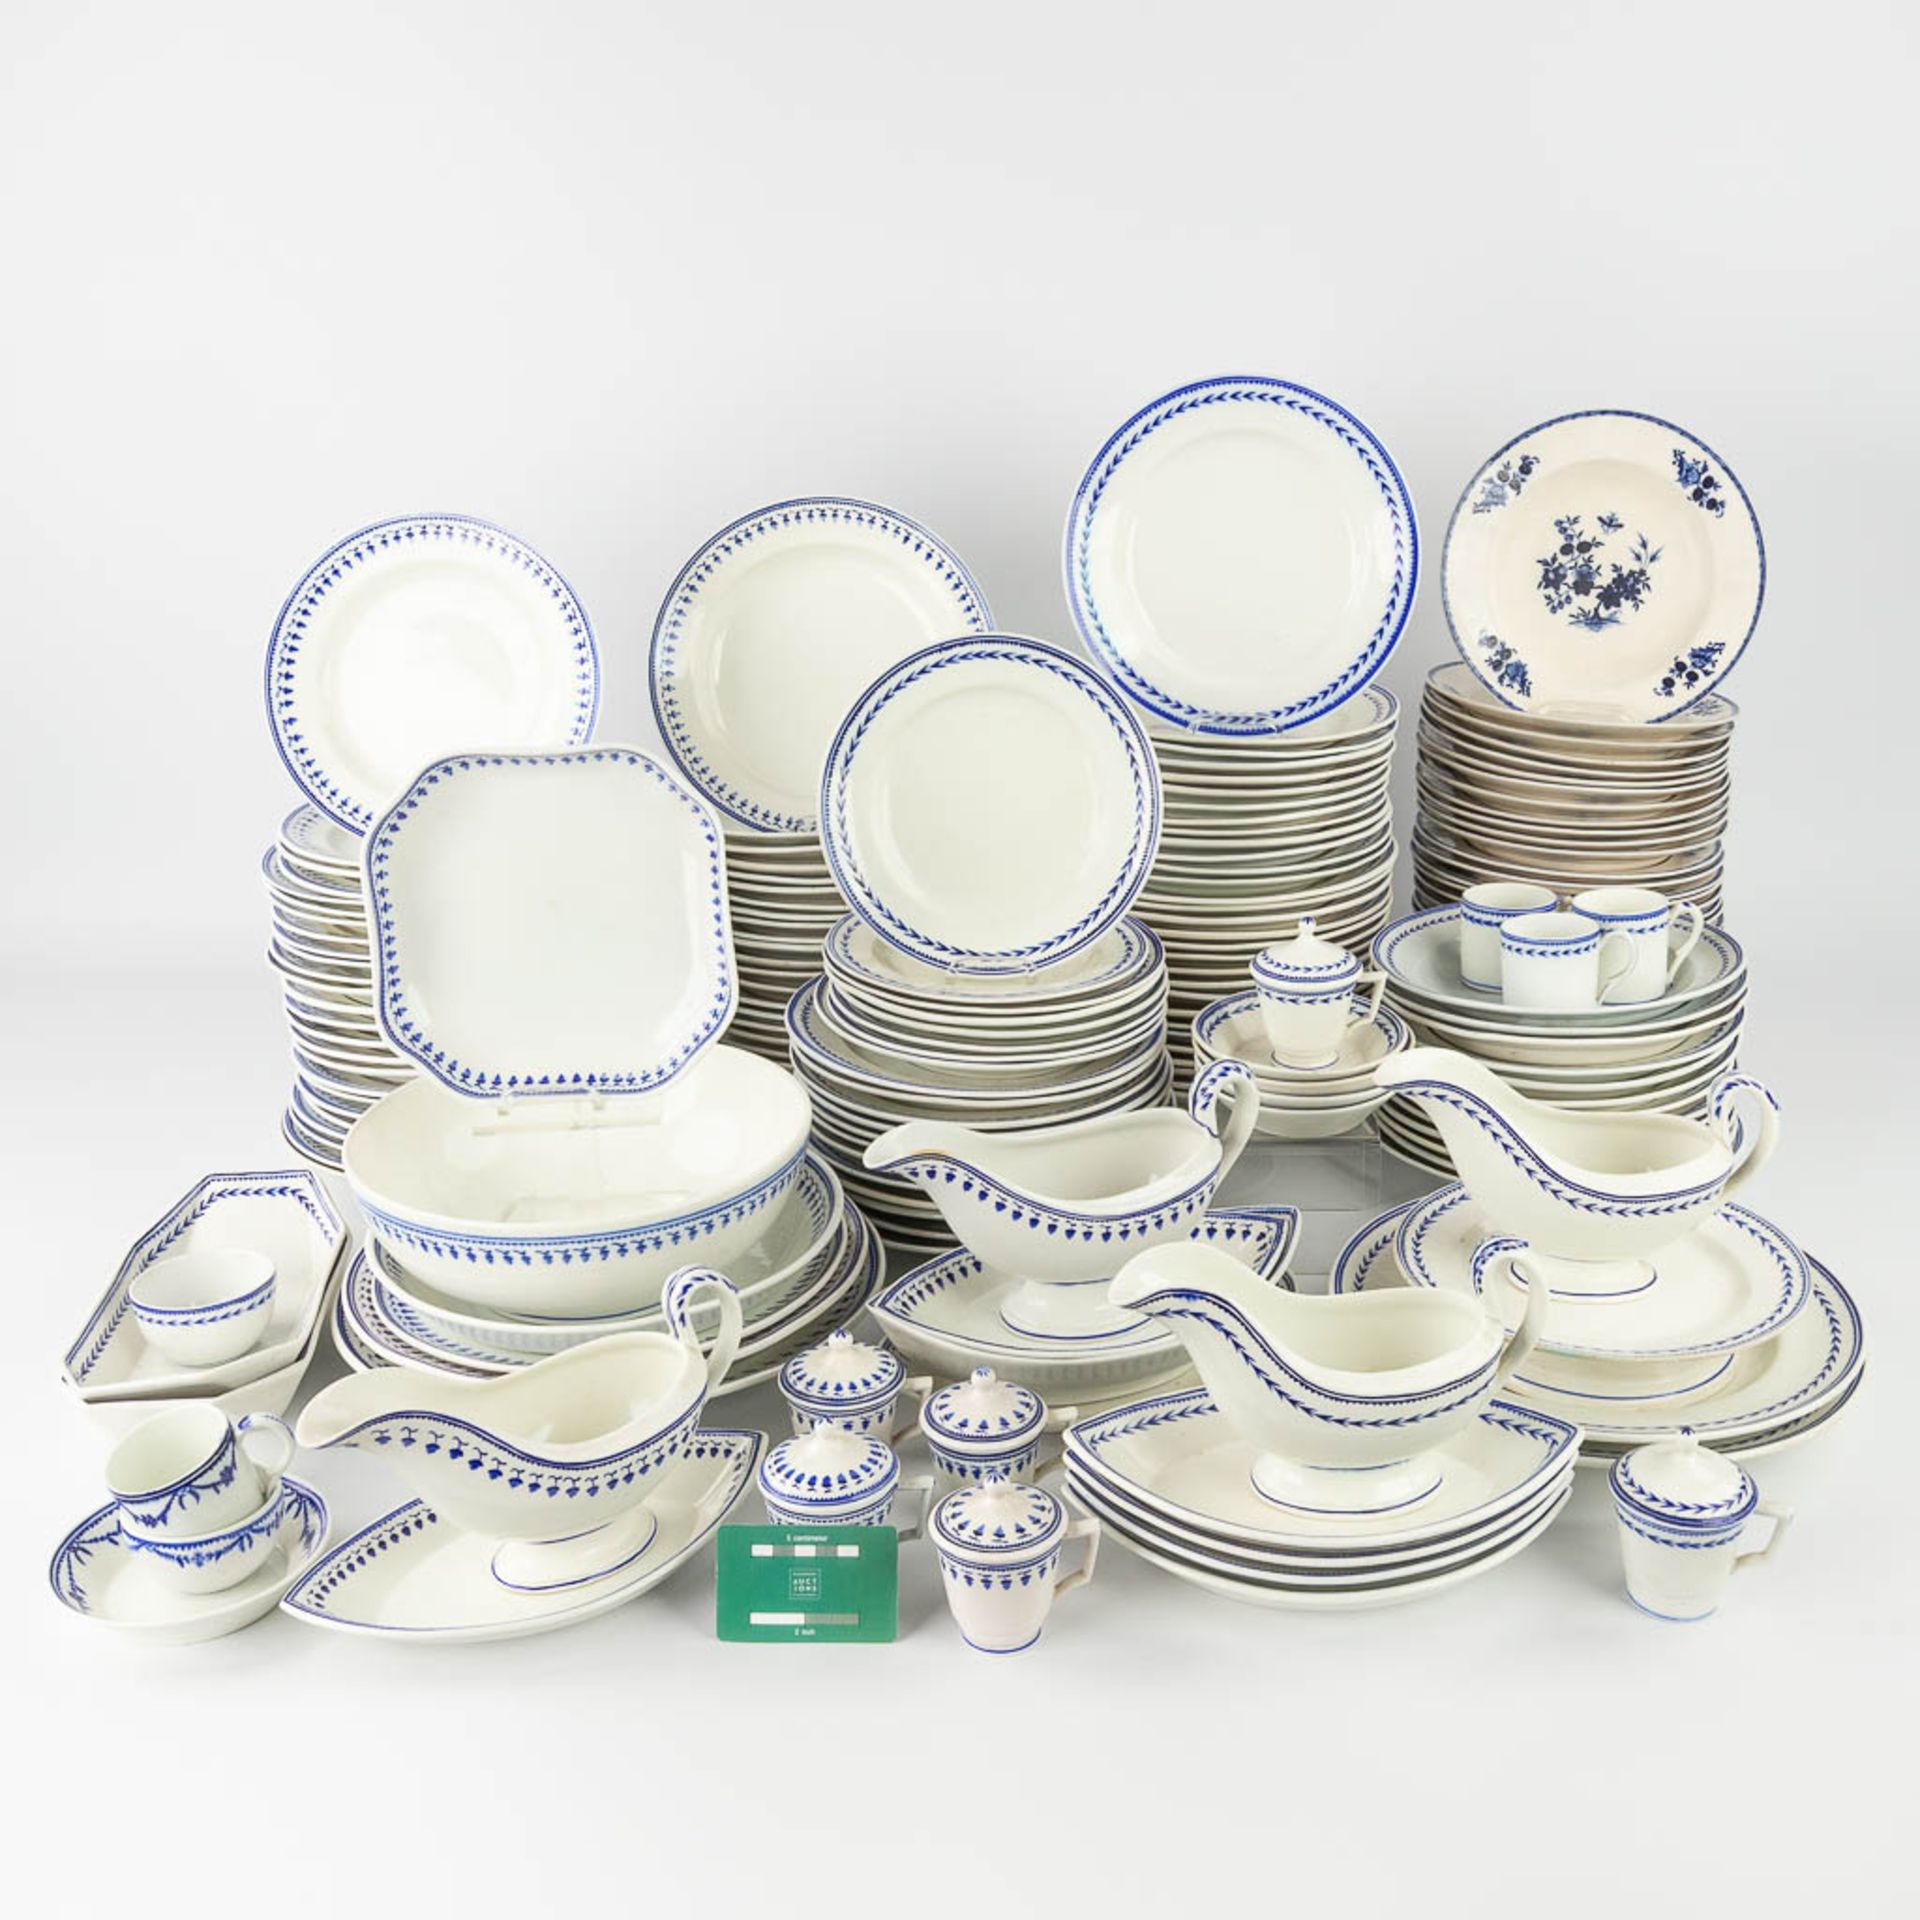 Tournai ceramics, a very large collection of faience plates, saucers and serving accessories. 174 pi - Image 2 of 21